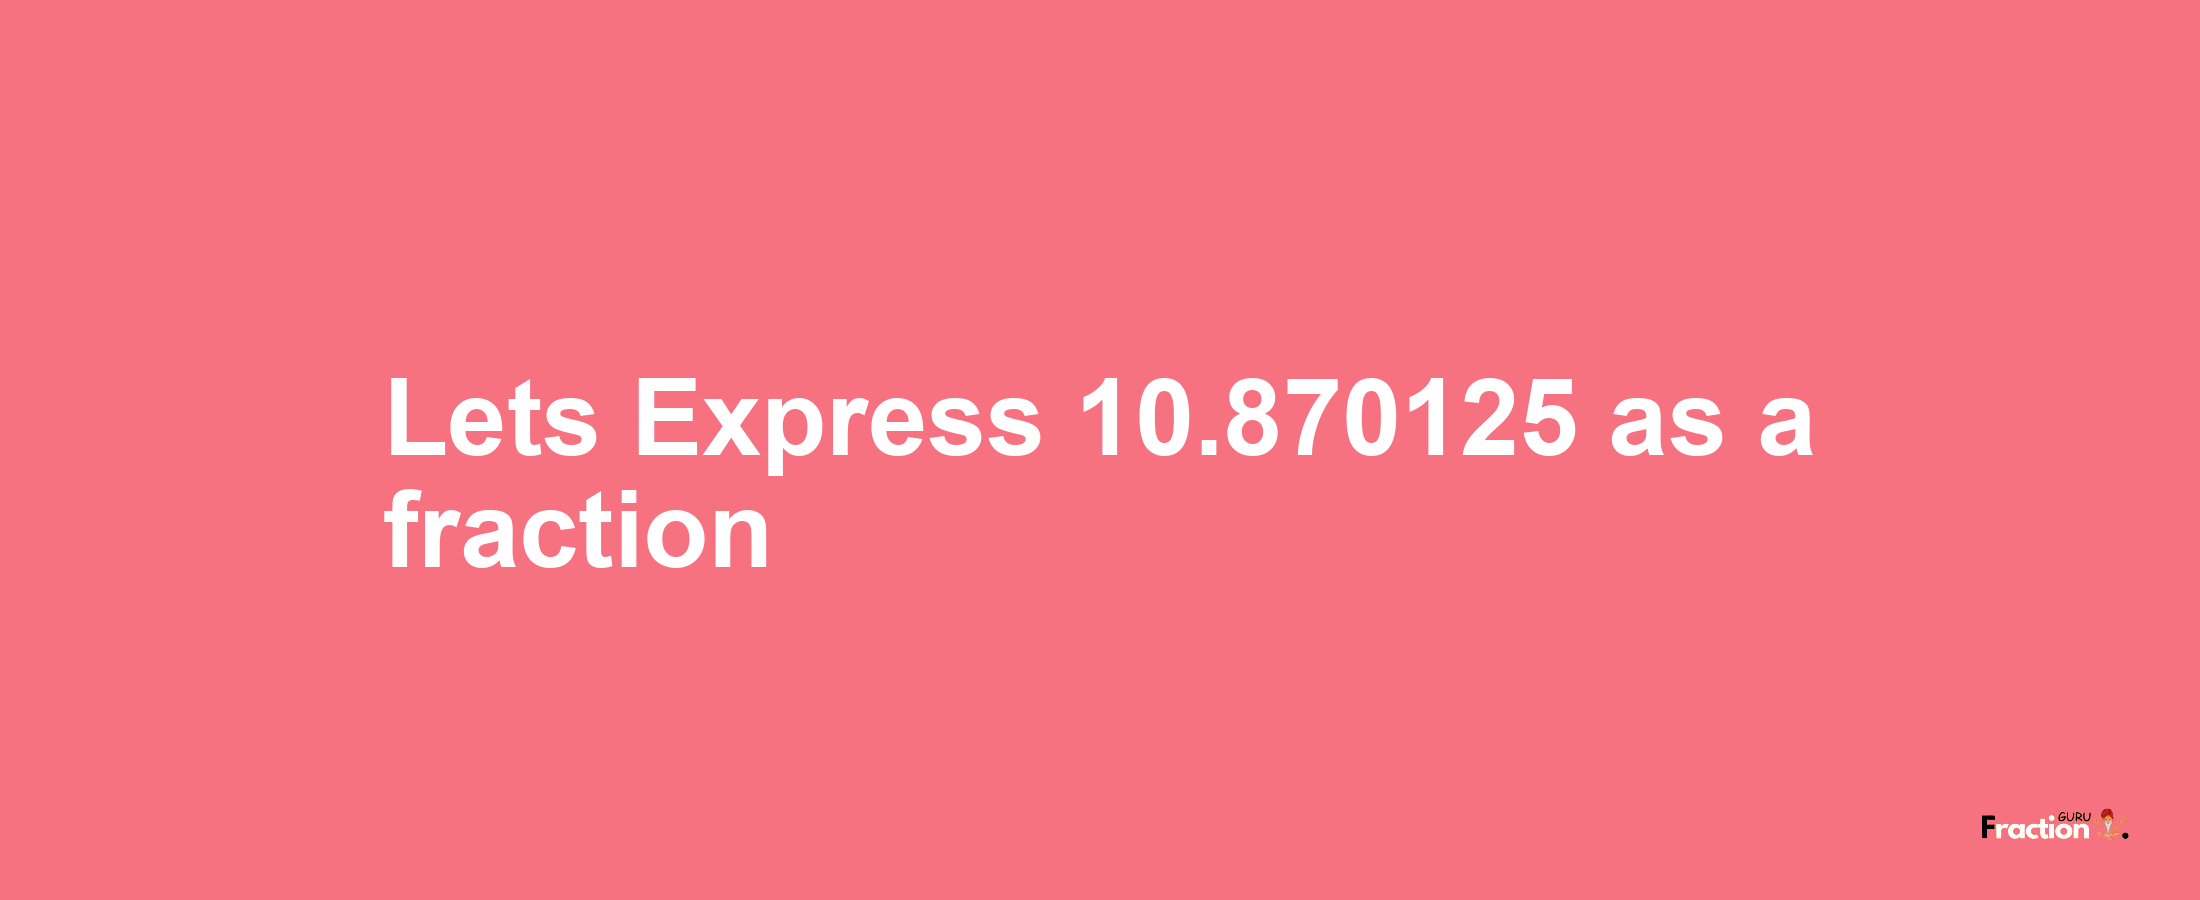 Lets Express 10.870125 as afraction